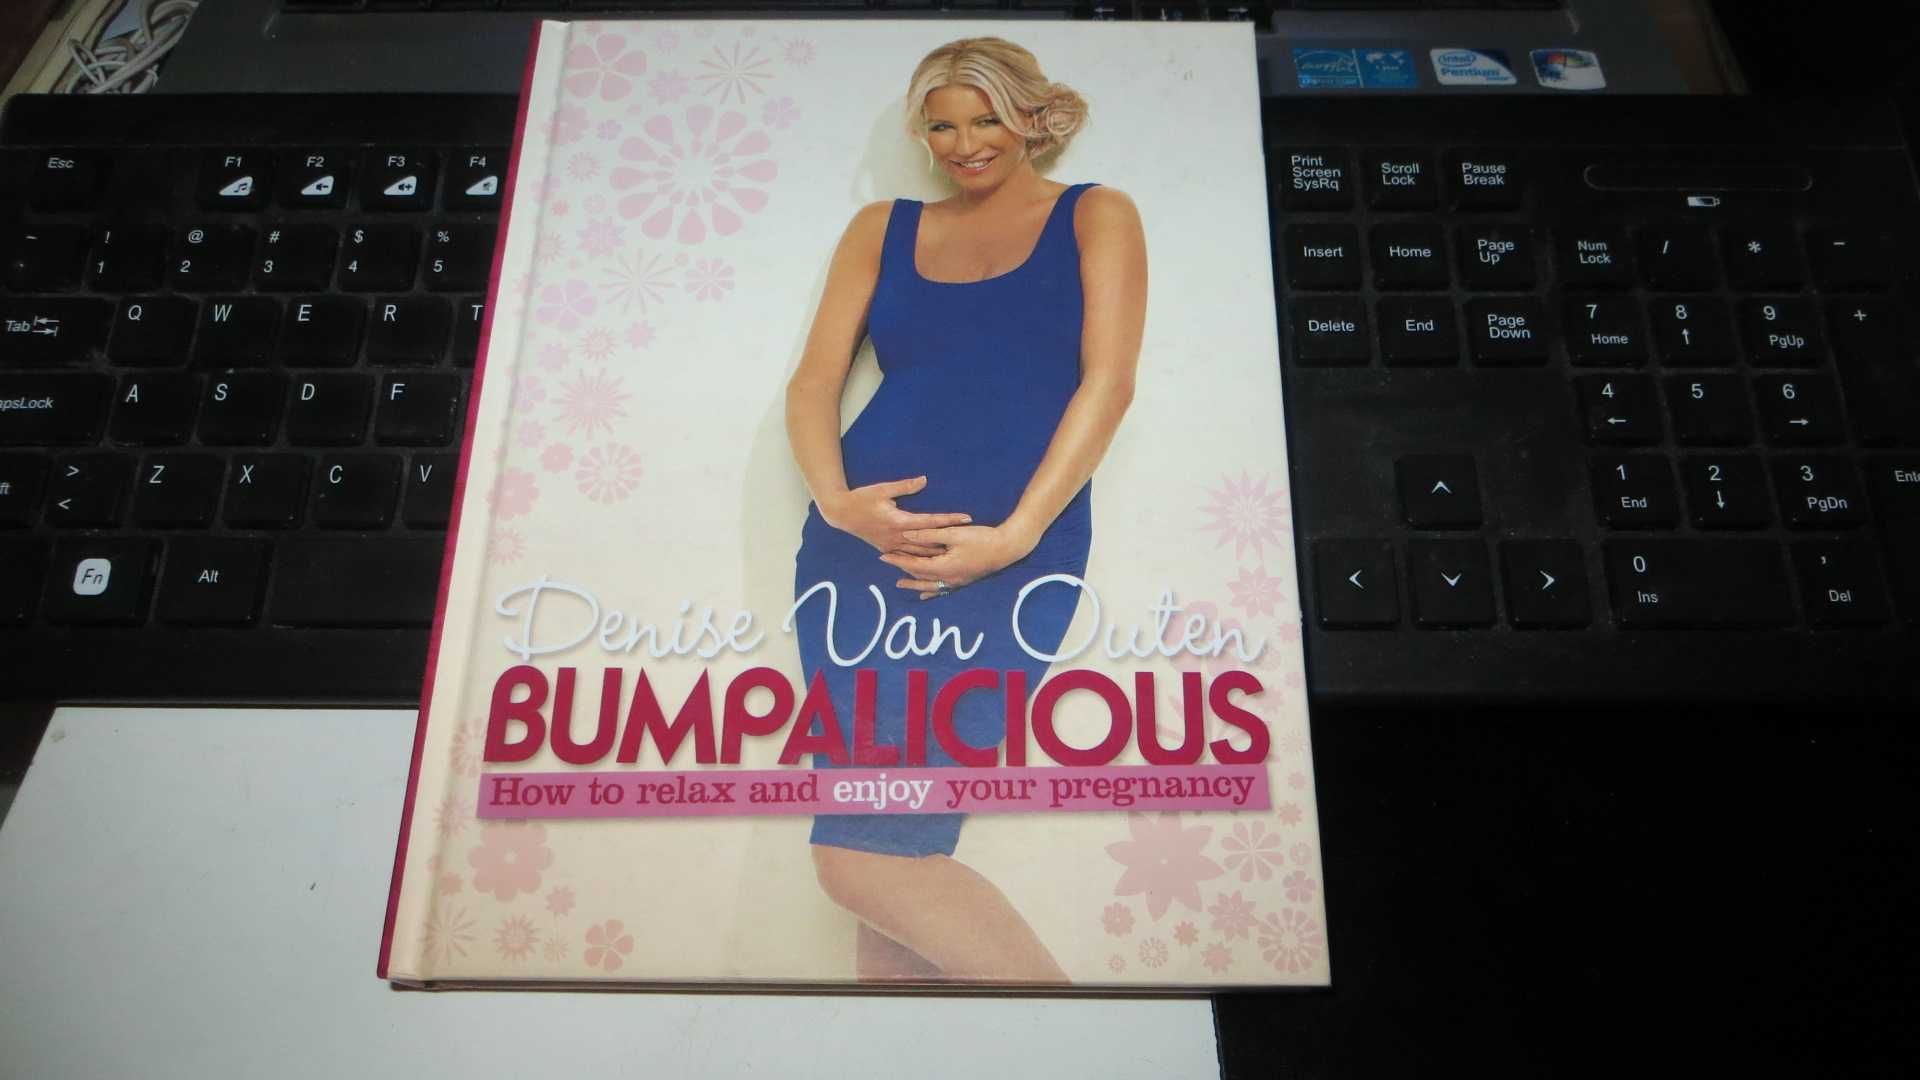 Denise Van Outen "Bumpalicious" How to relax and enjoy your pregnancy